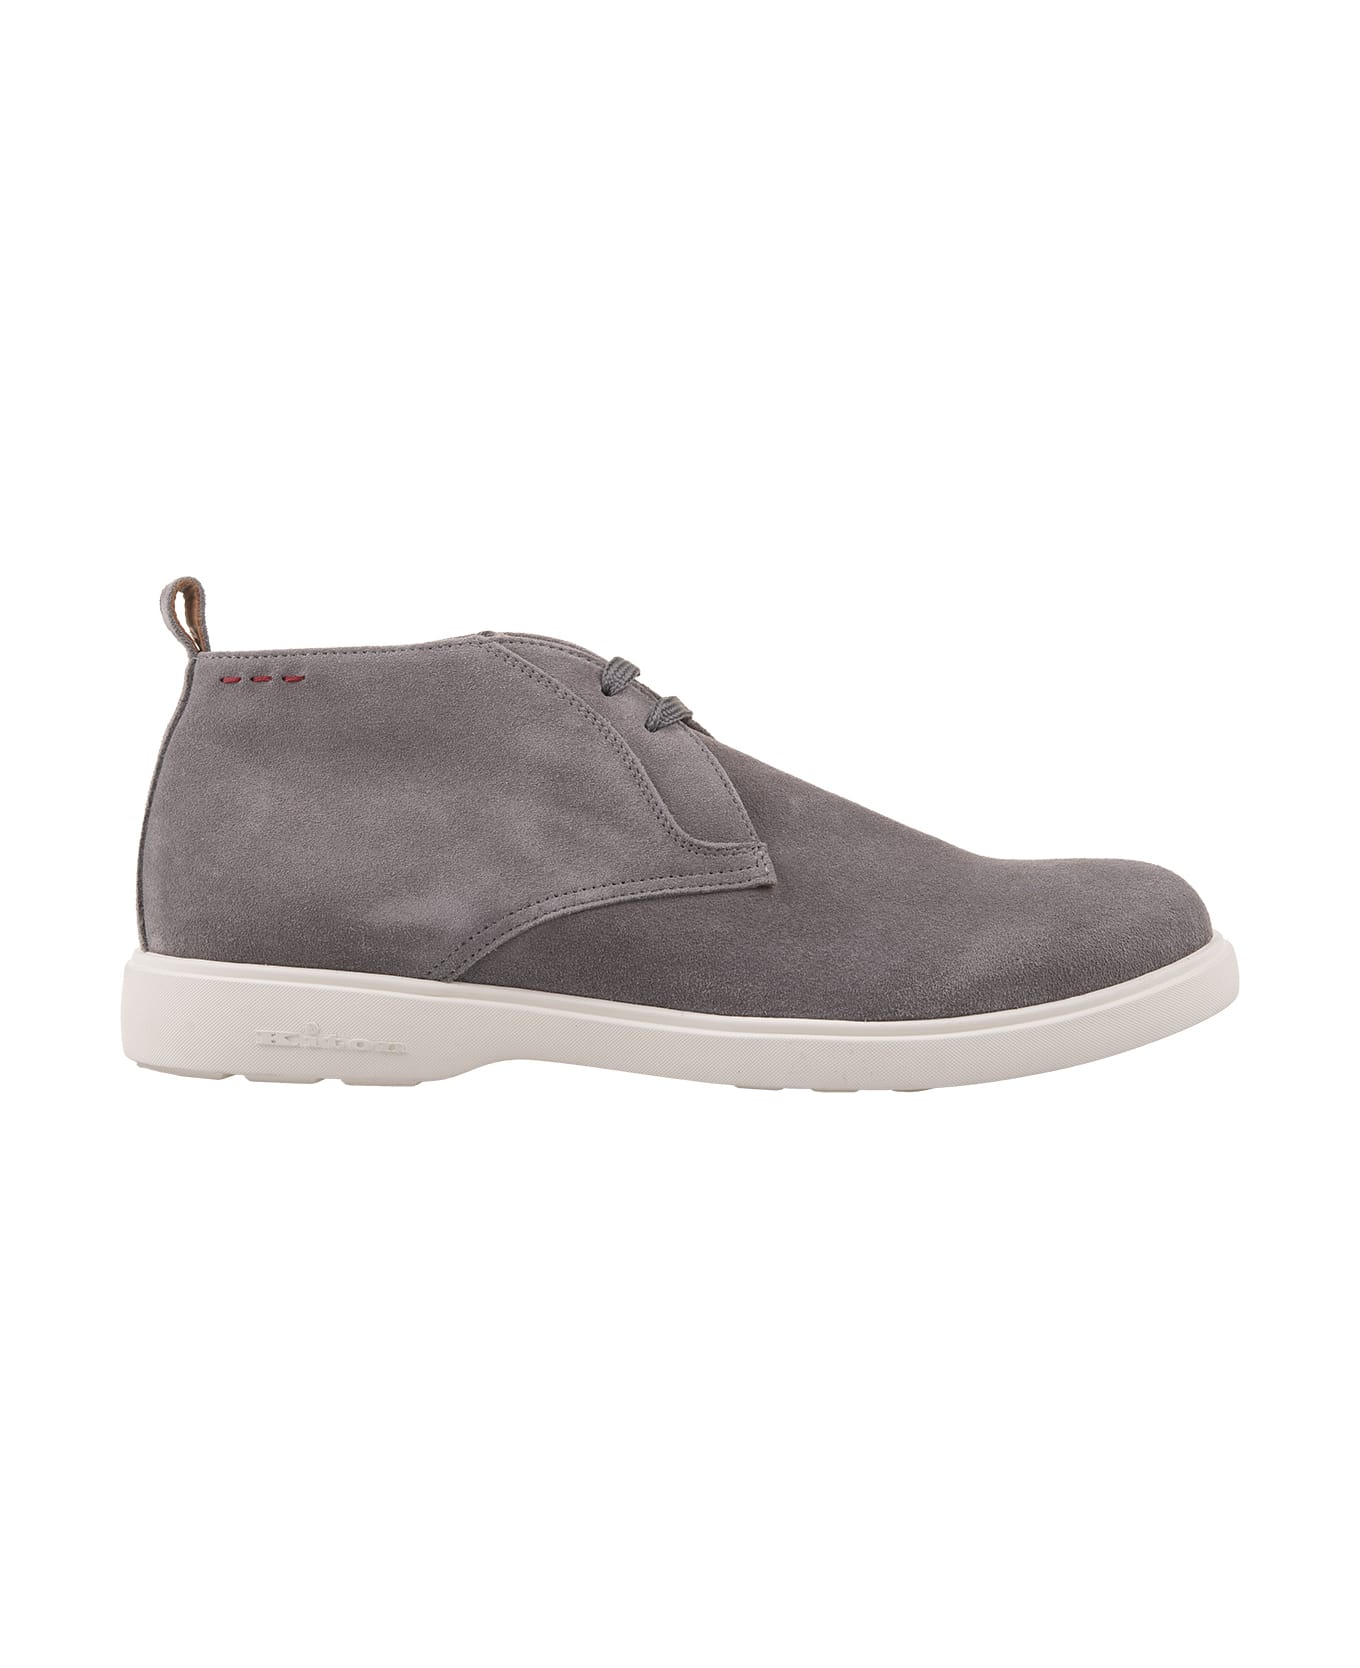 Kiton Grey Suede Laced Leather Ankle Boots - Grey ローファー＆デッキシューズ